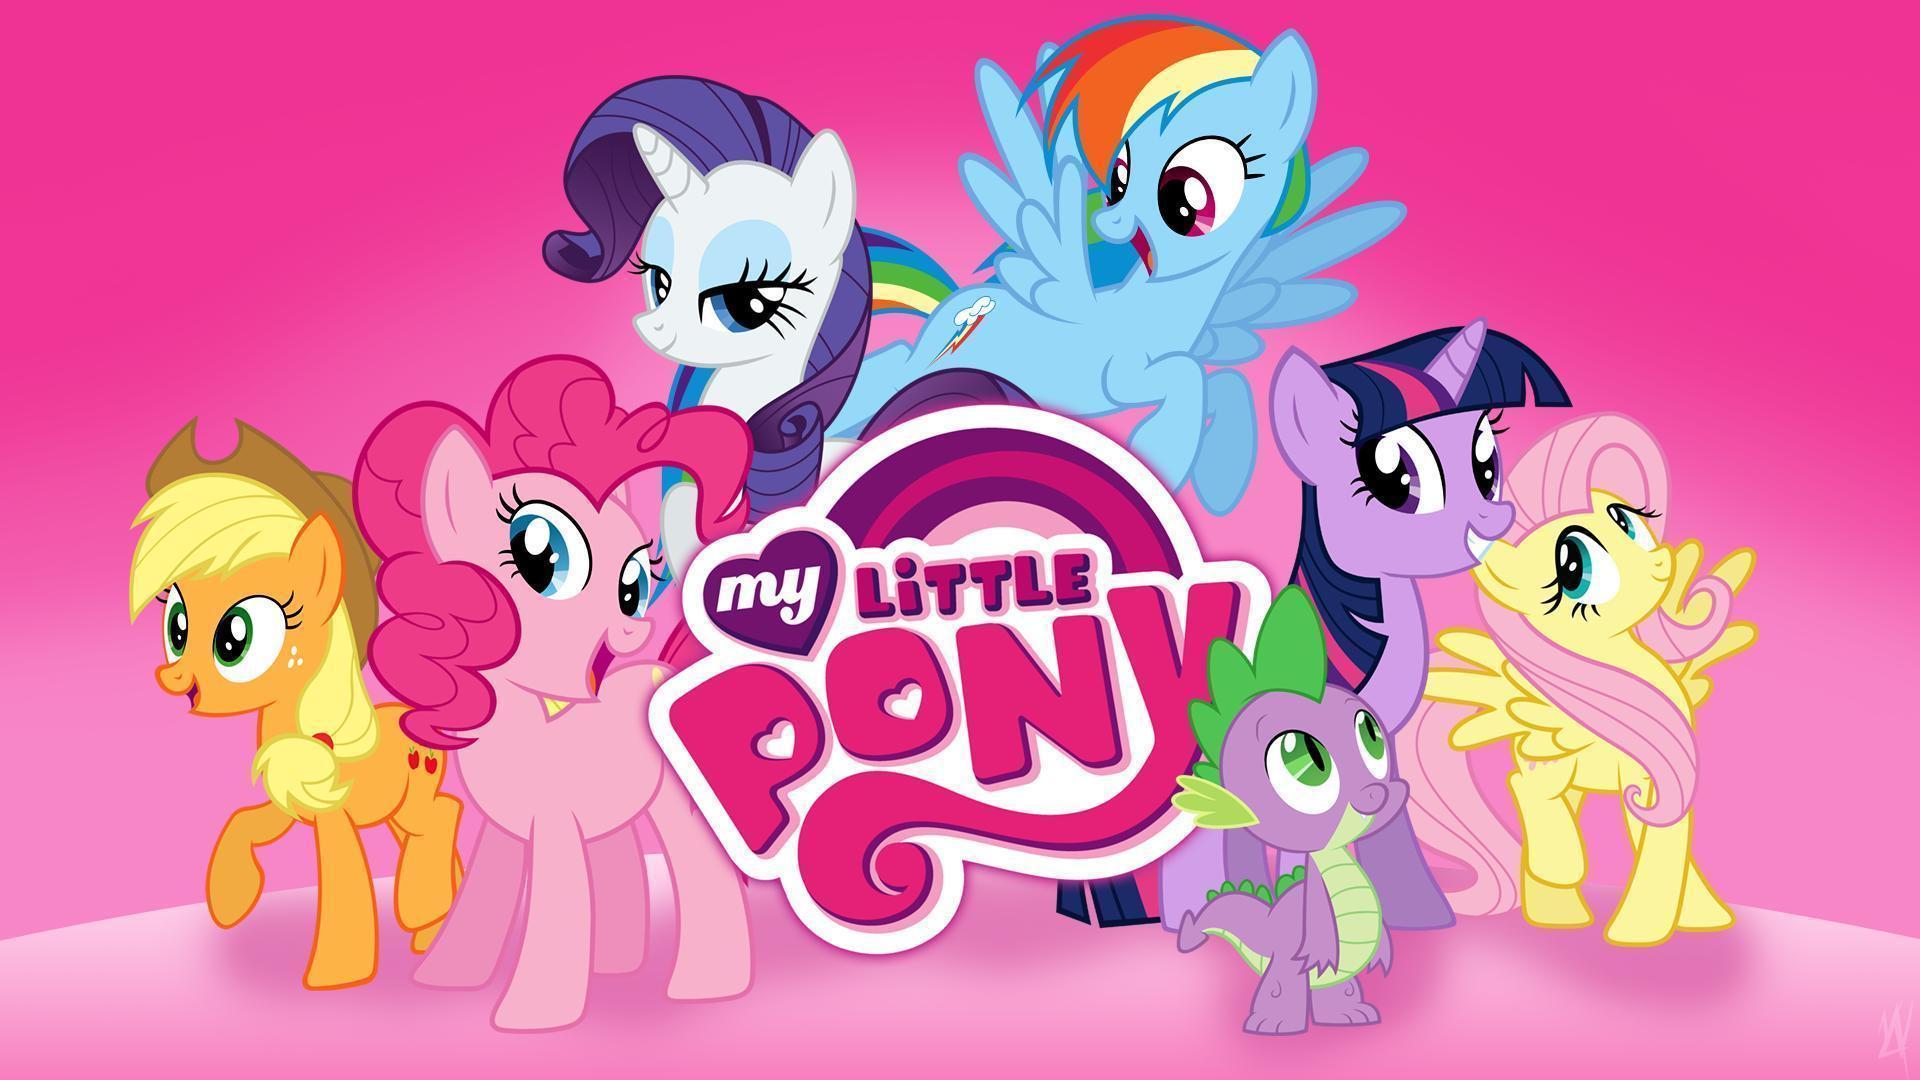 My Little Pony Reads All Day Win Screensaver